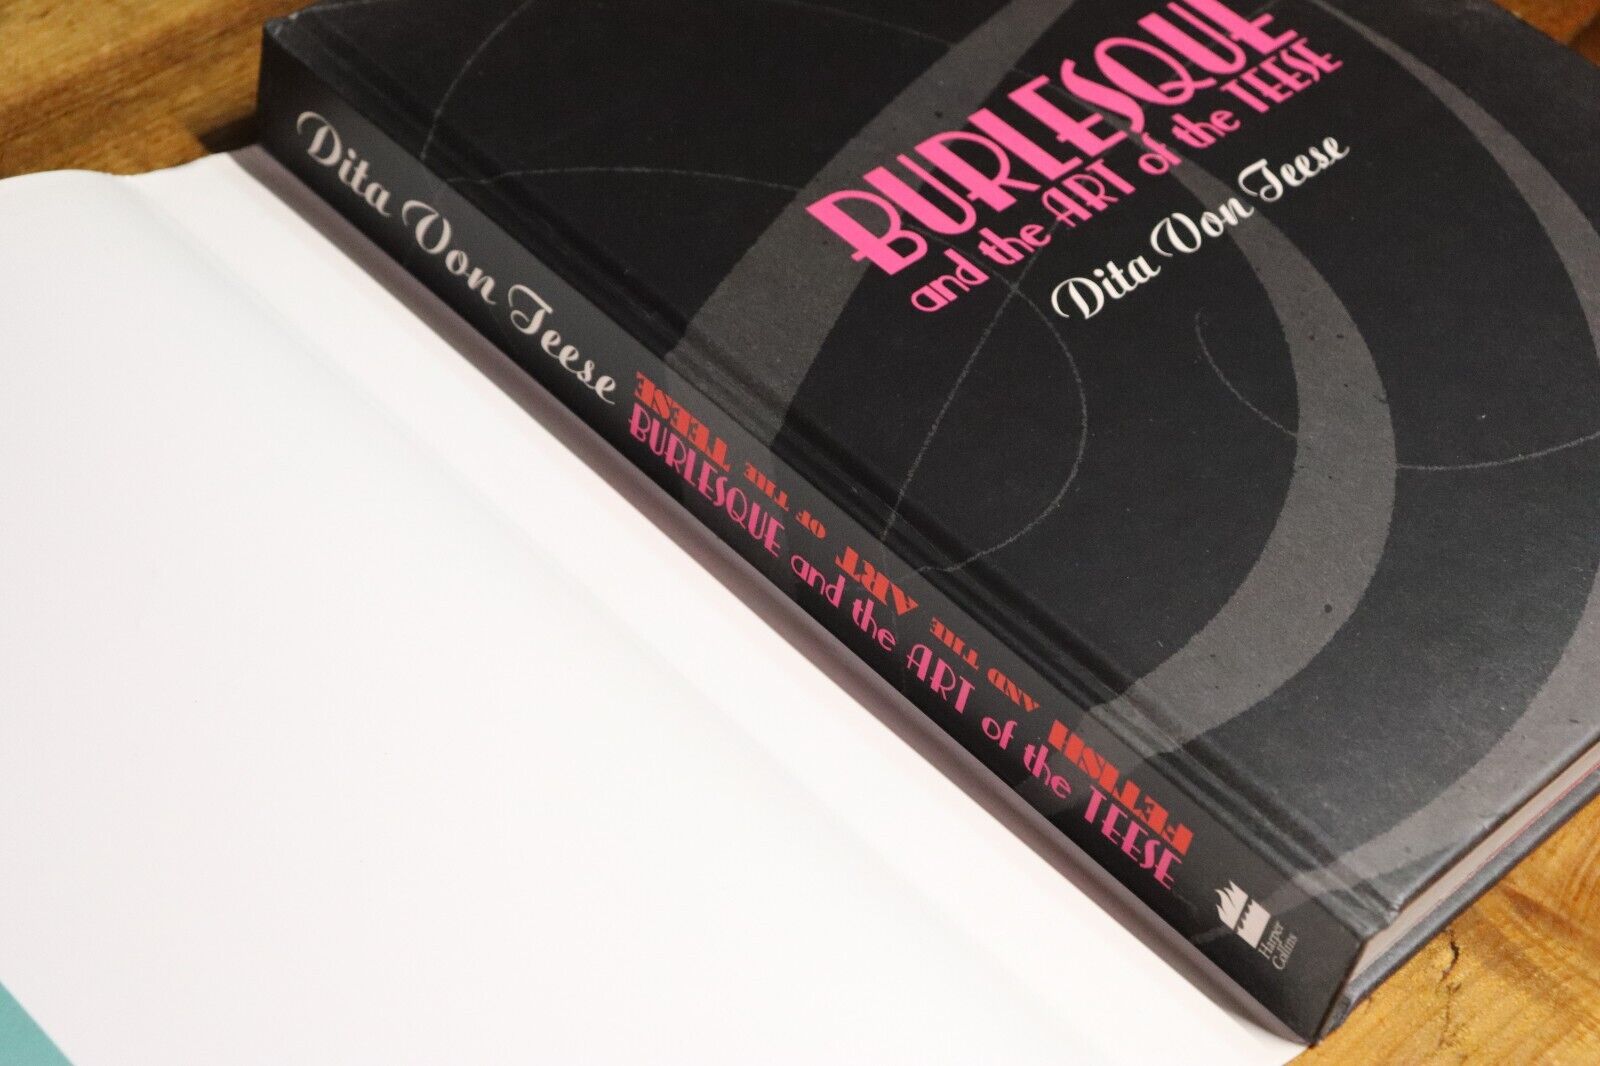 Burlesque Fetish & The Art Of The Teese - 2006 - Pop Culture Hardcover Book